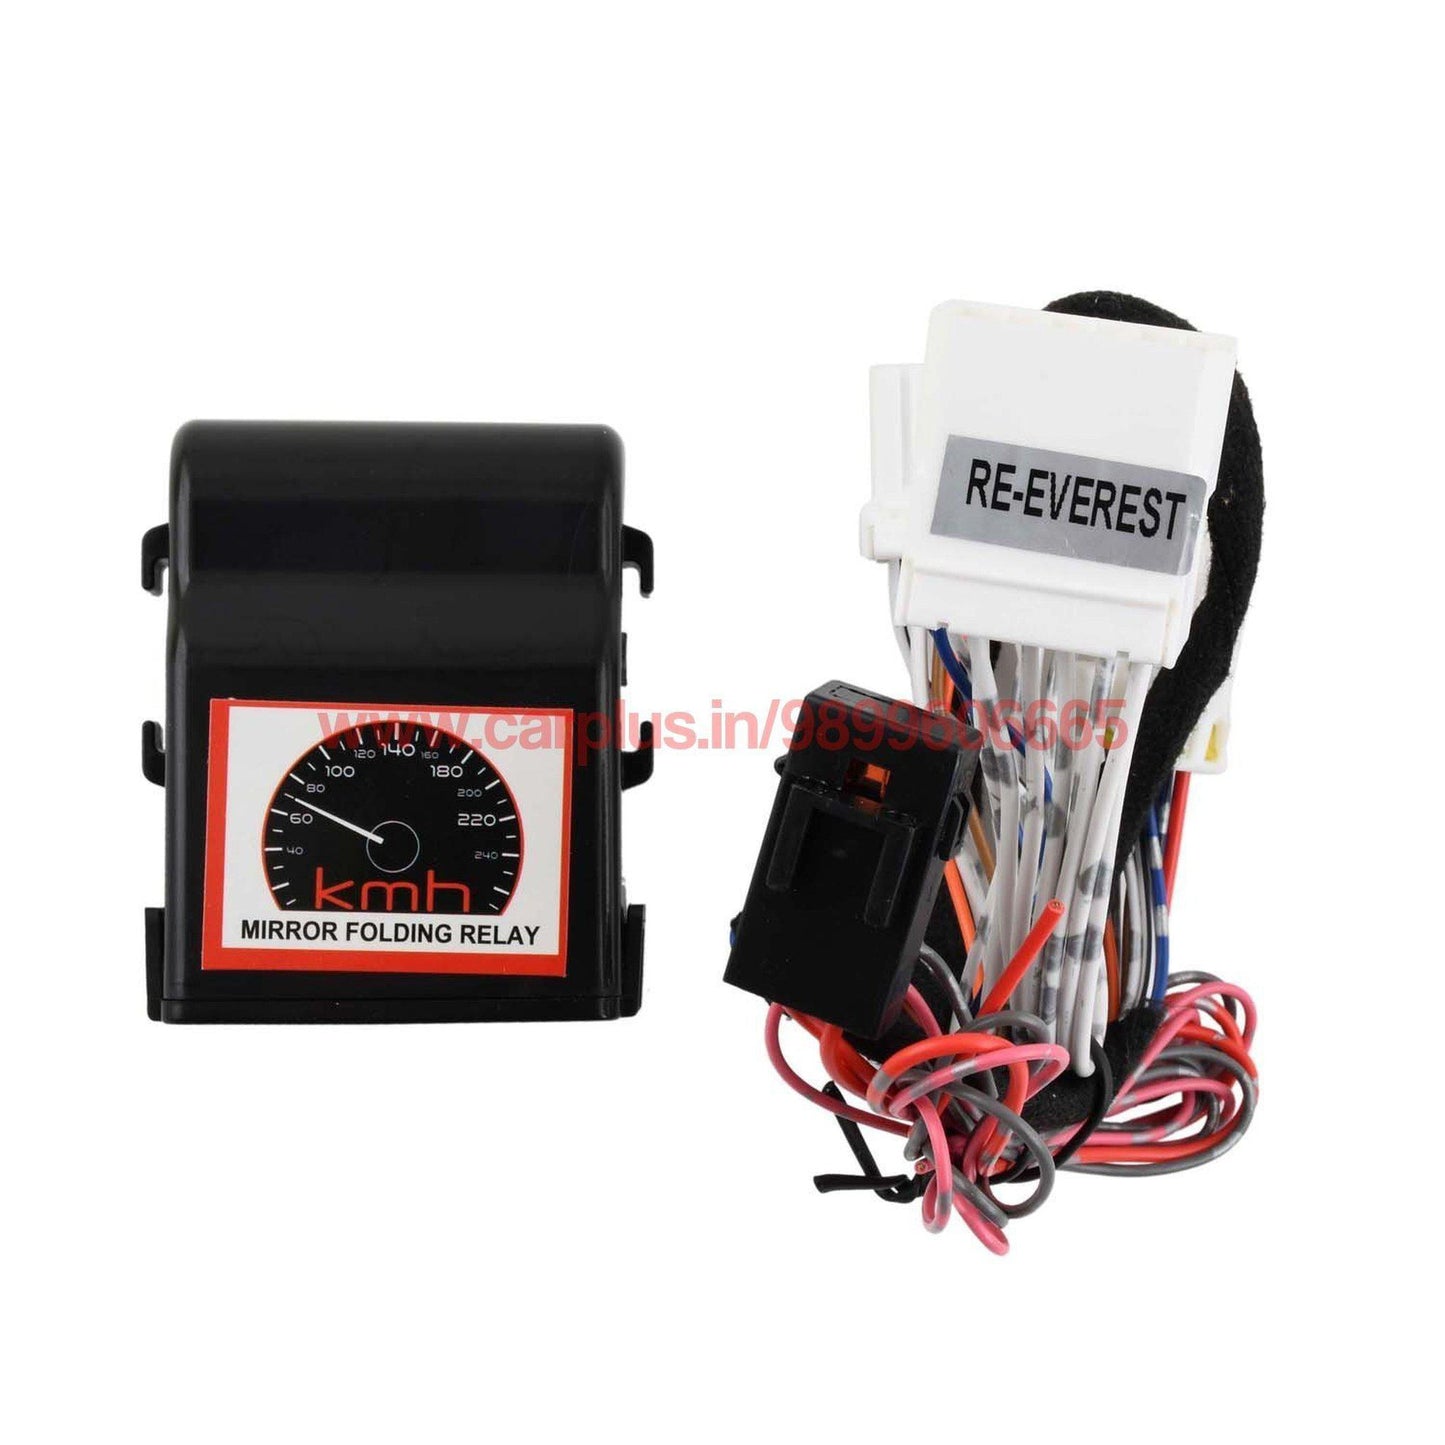 
                  
                    KMH Mirror Folding Relay for Ford Endeavour (2nd GEN) KMH-MIRROR FOLDING RELAY MIRROR FOLDING RELAY.
                  
                